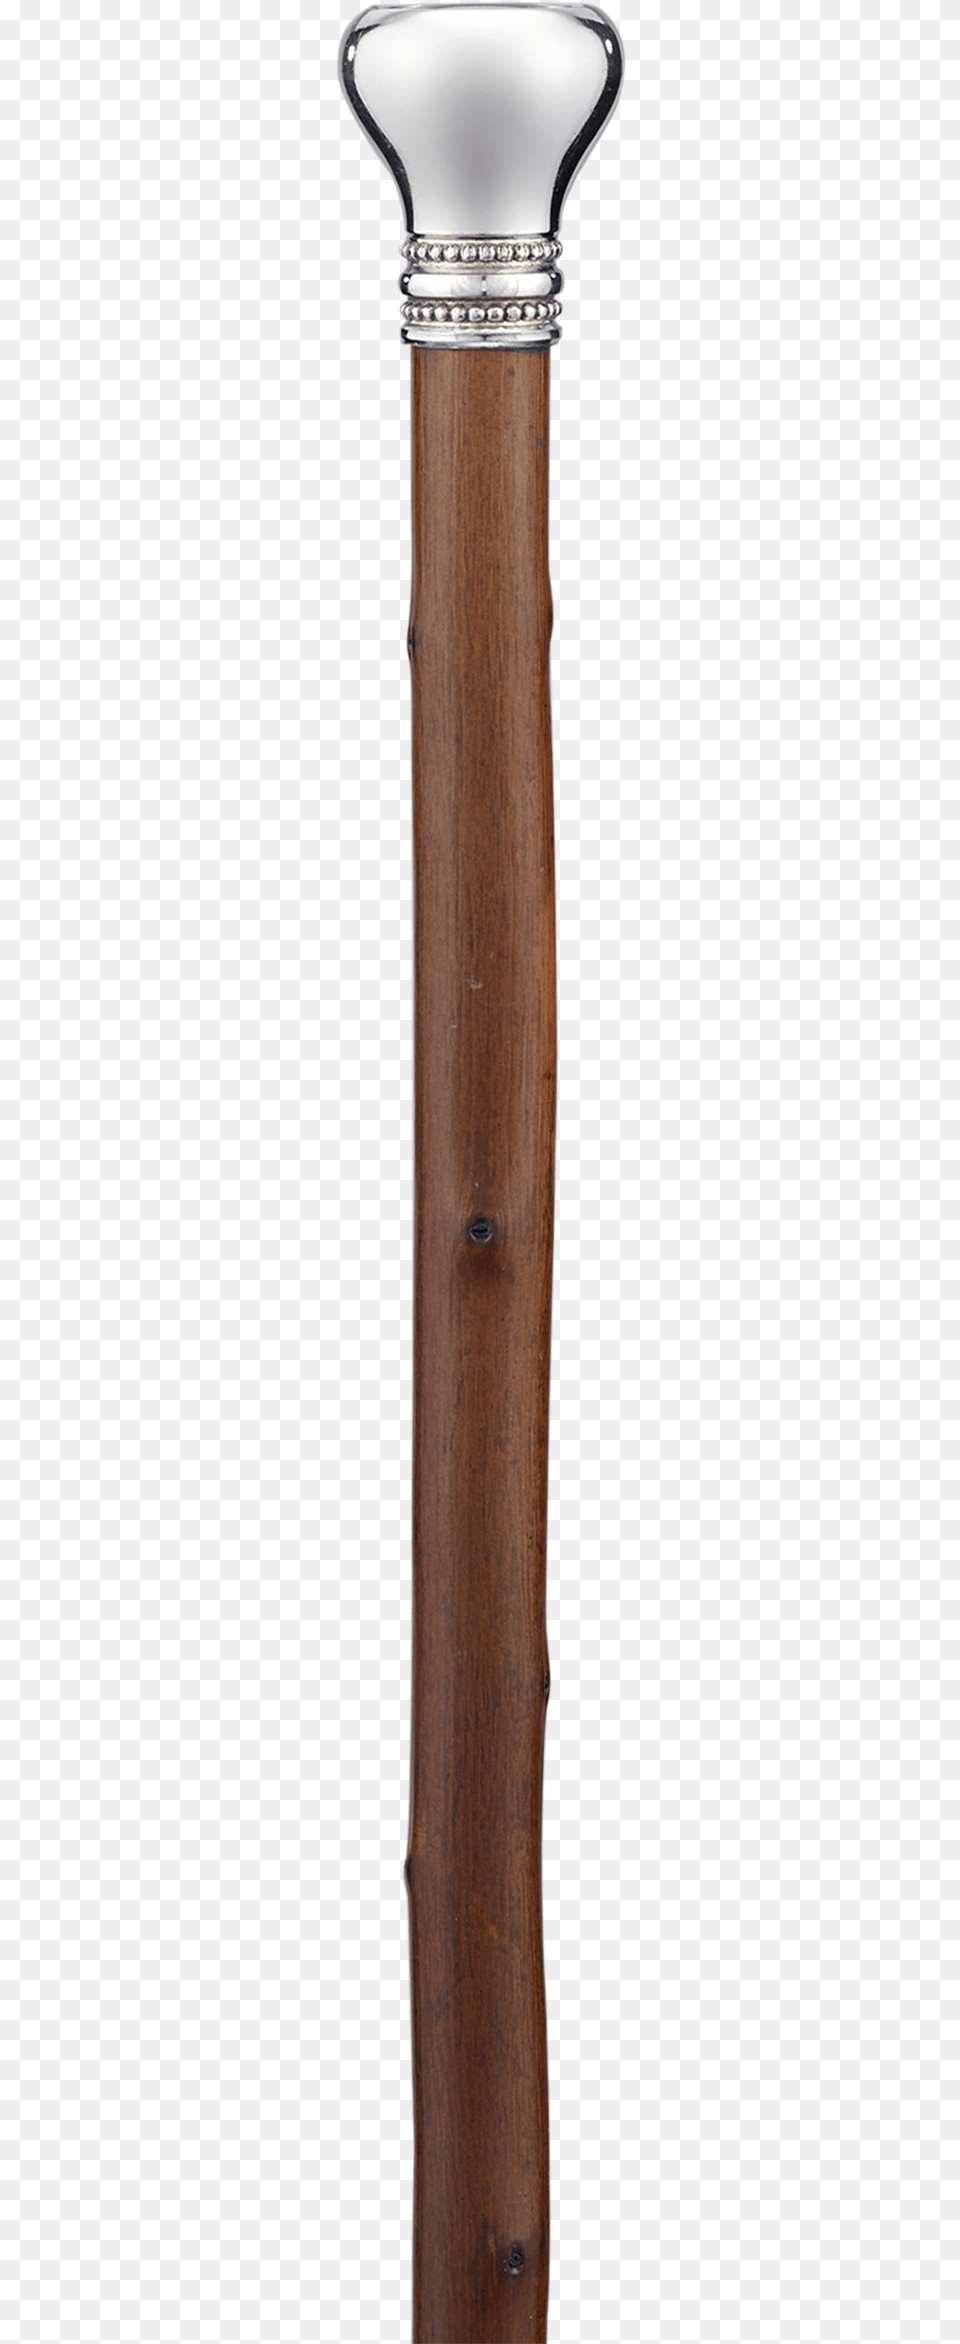 Ornamental Silverplate And Knotted Wood Walking Stick Wood, Cane Png Image